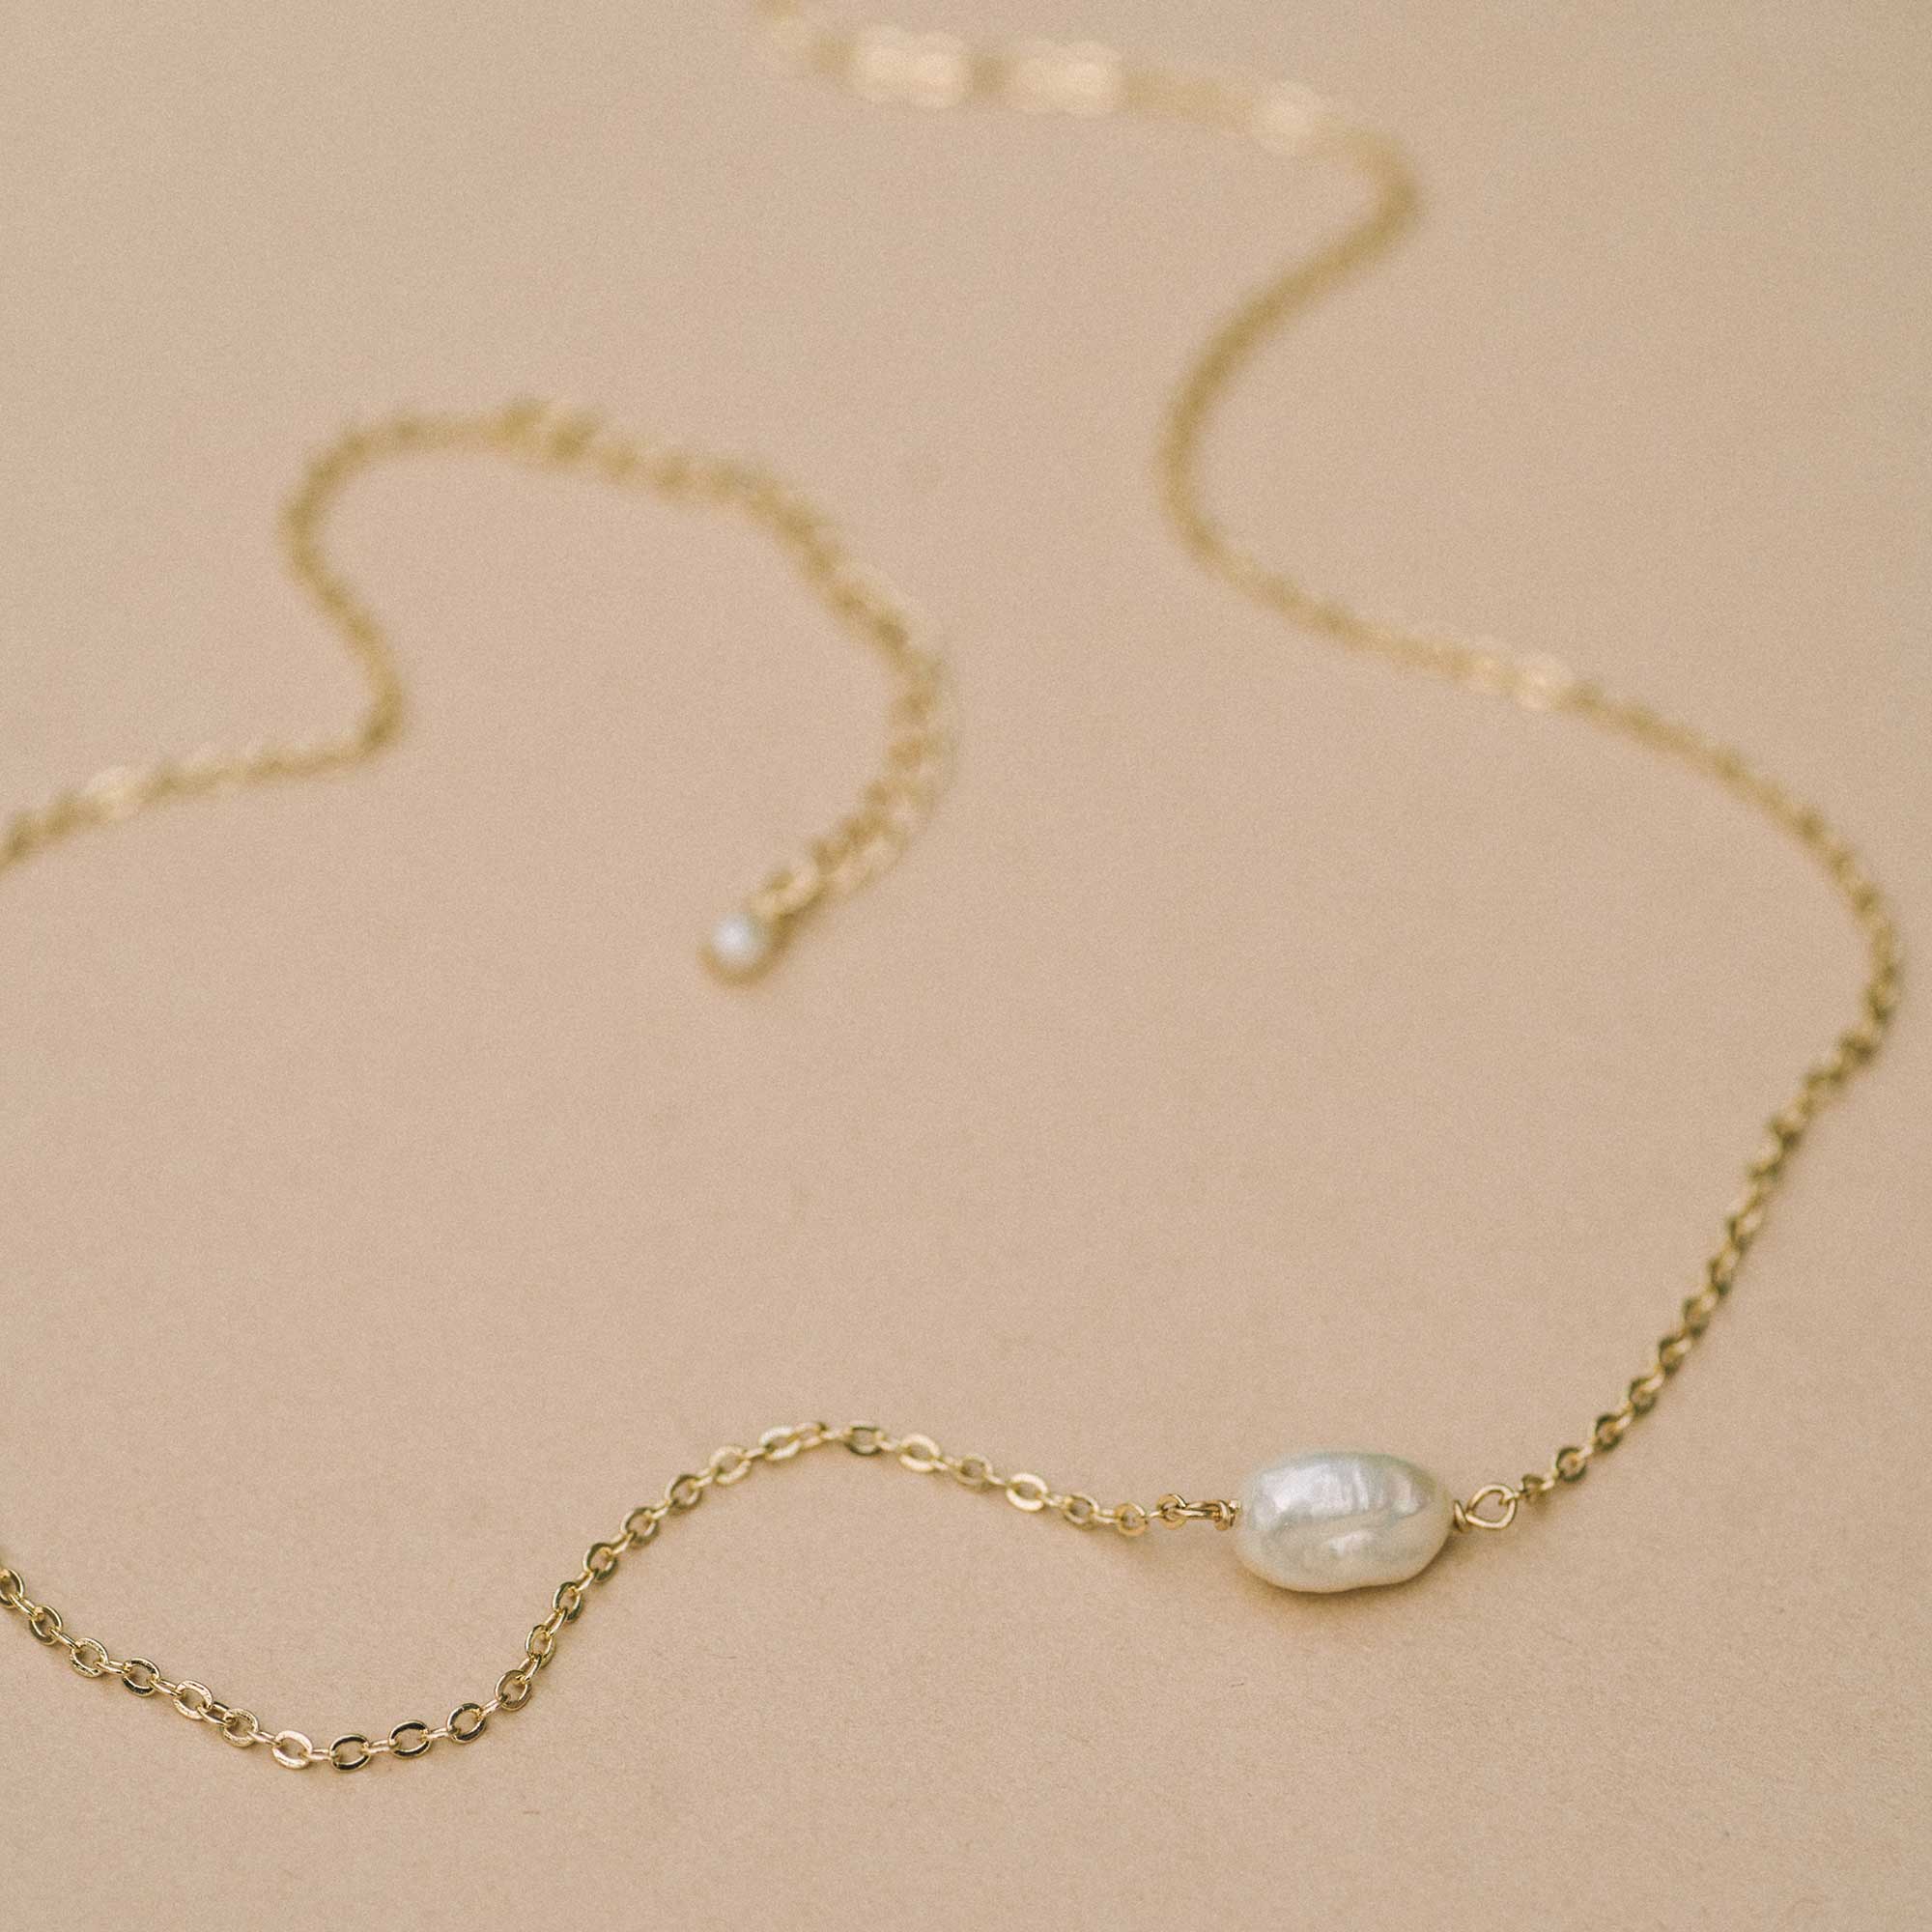 Freshwater Pearl Choker Necklace 14K Gold Filled (SD1817)